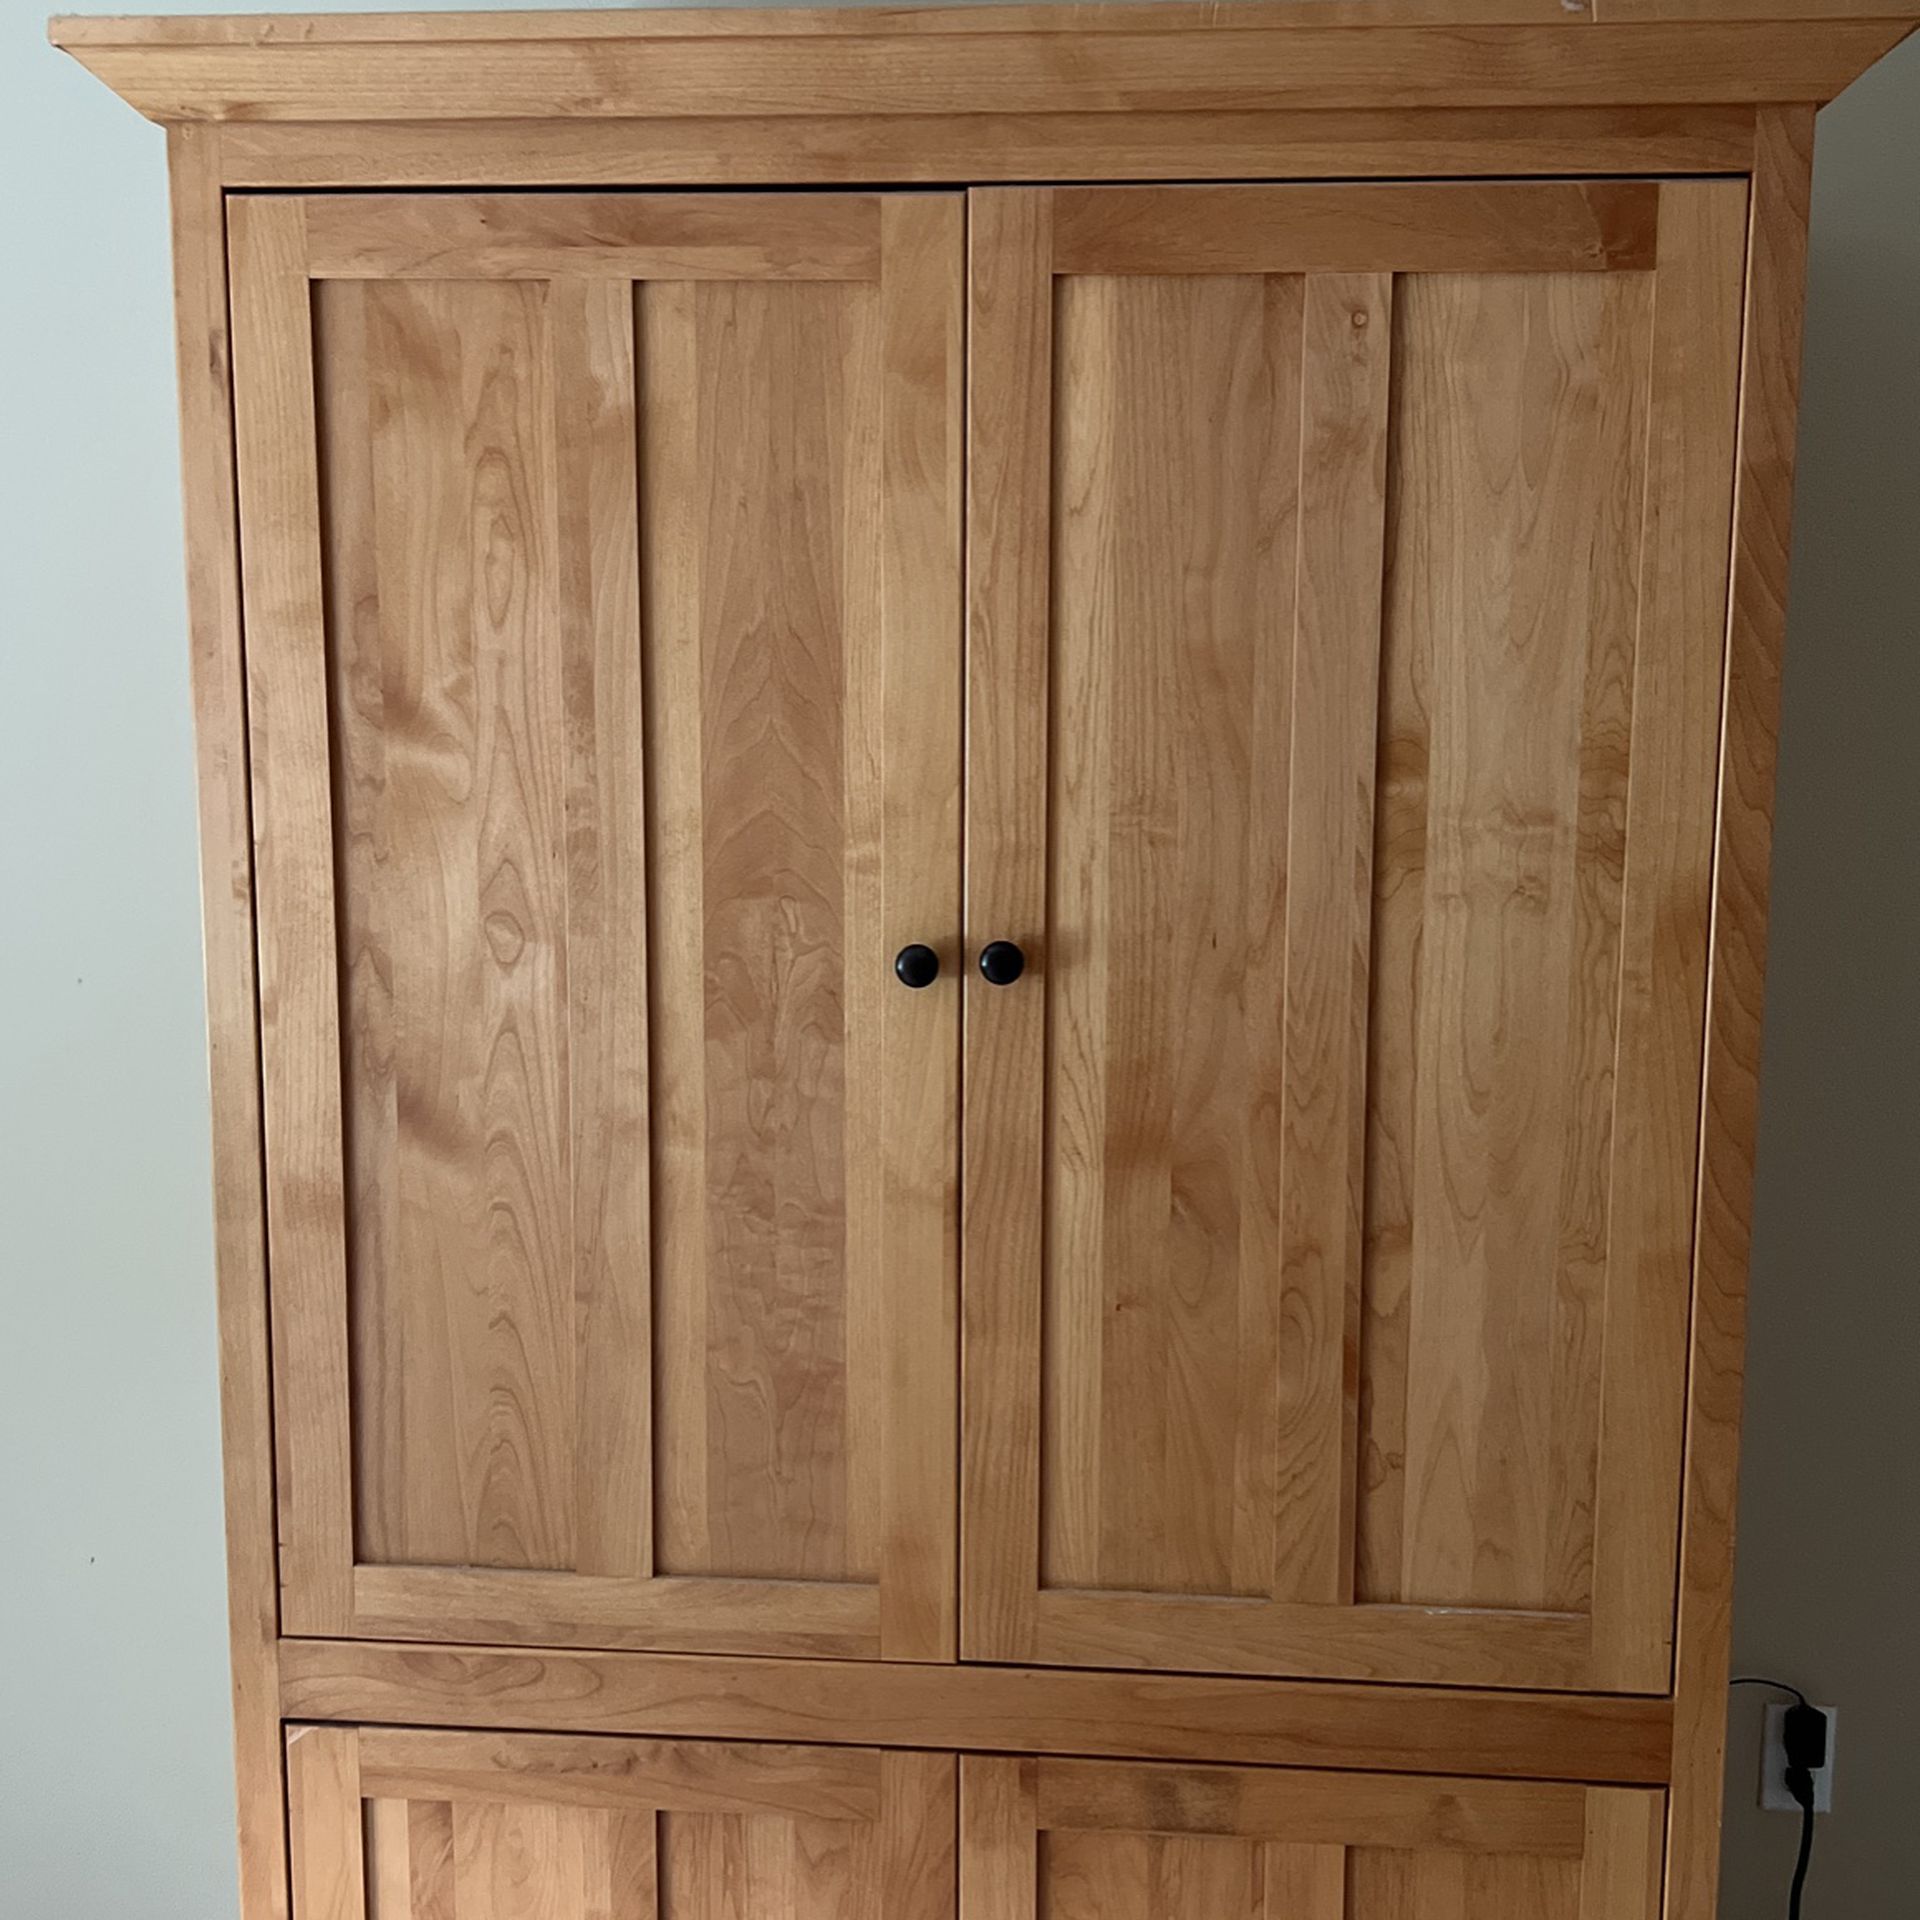 TV Armoire Cabinet